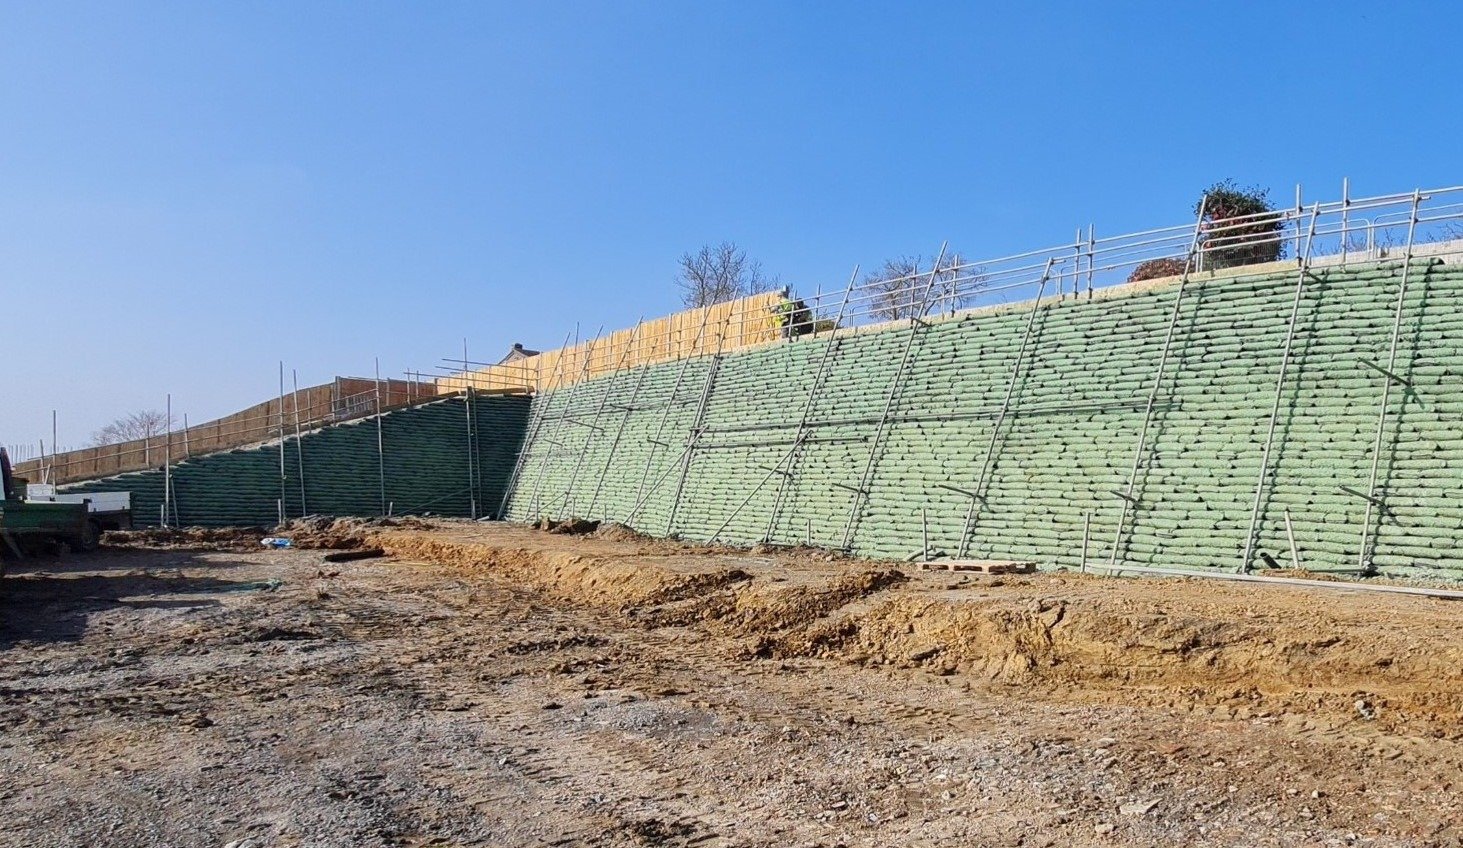 Site Boundary Wall for 288 Homes